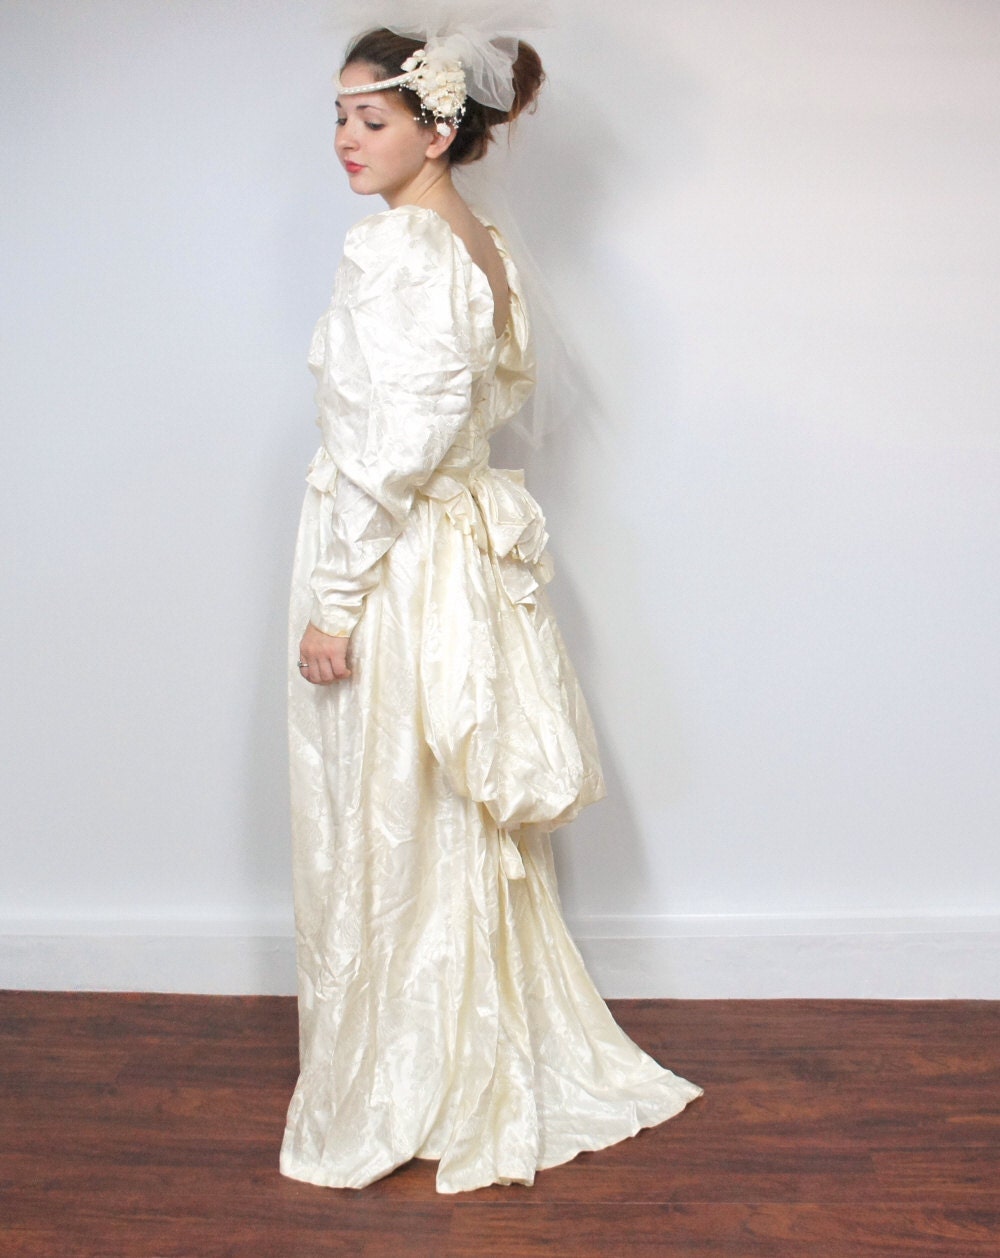 Guinevere Wedding Gown Bustled Brocade Creme Long Sleeved Train with Headpiece and Veil - VintageAgelessThings